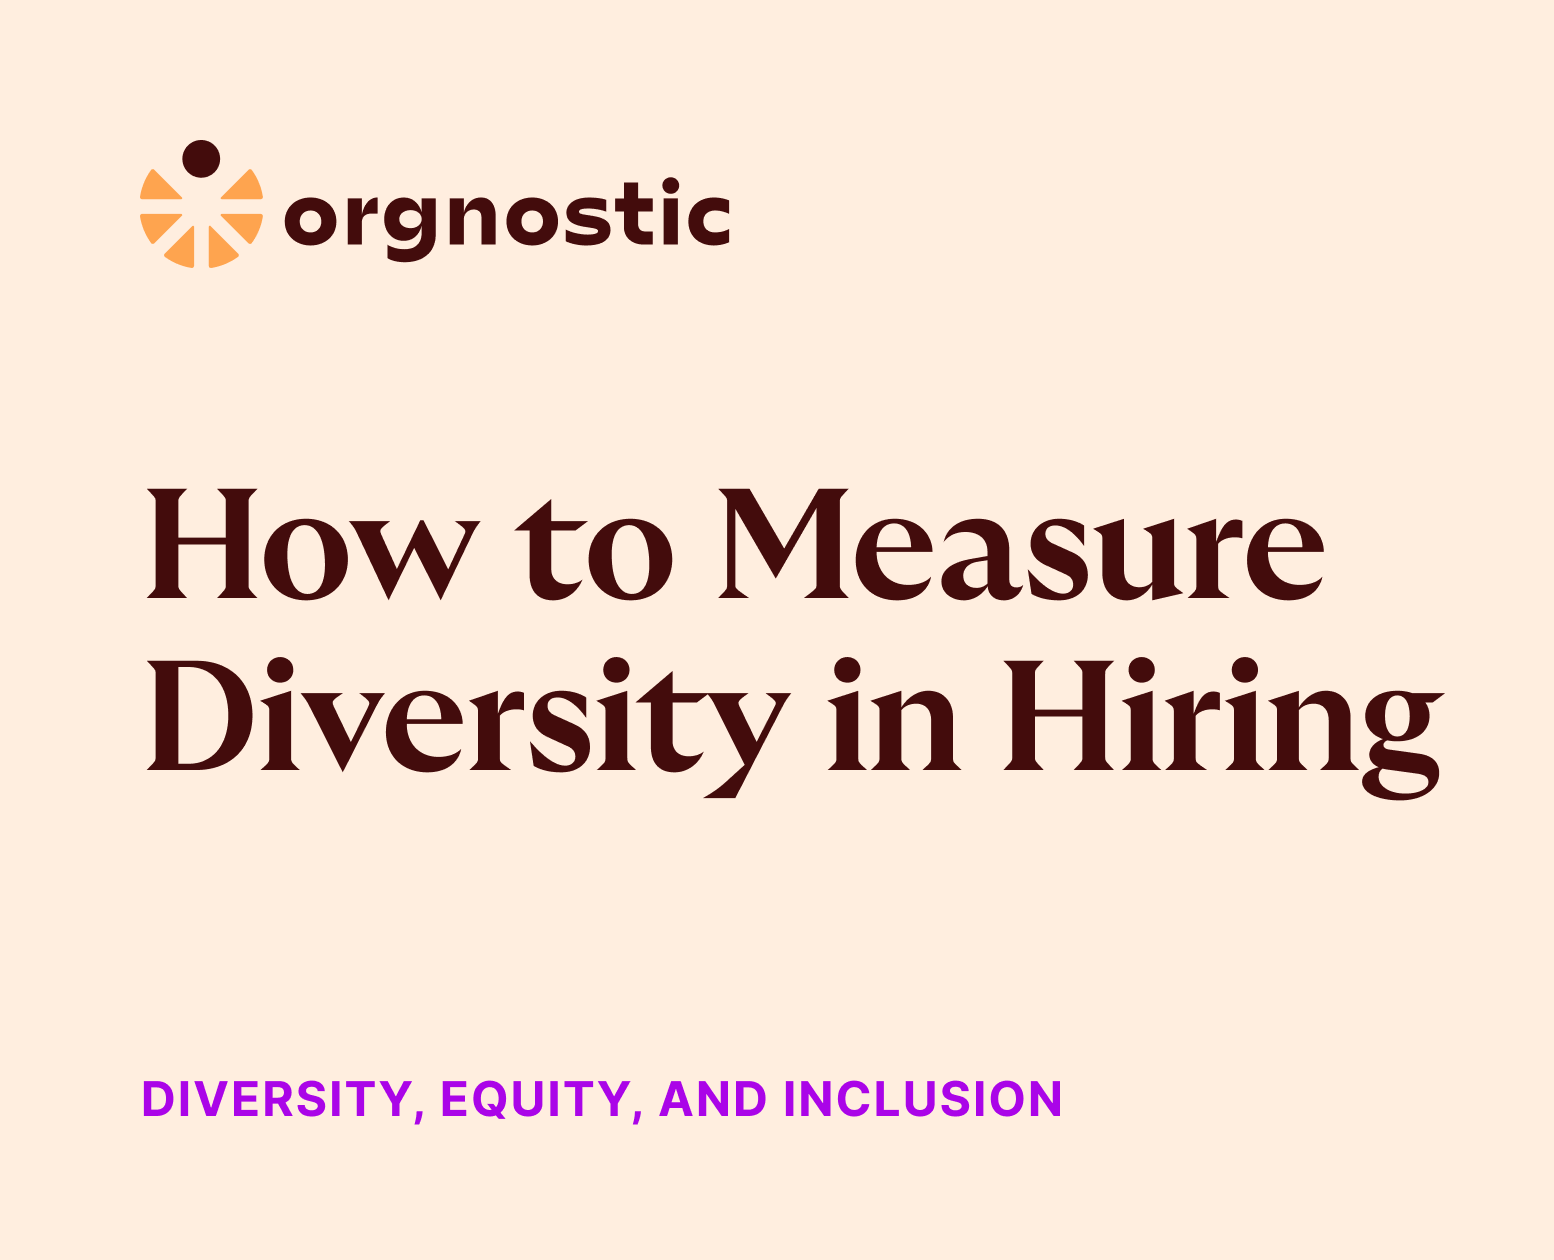 How to Measure Diversity in Hiring